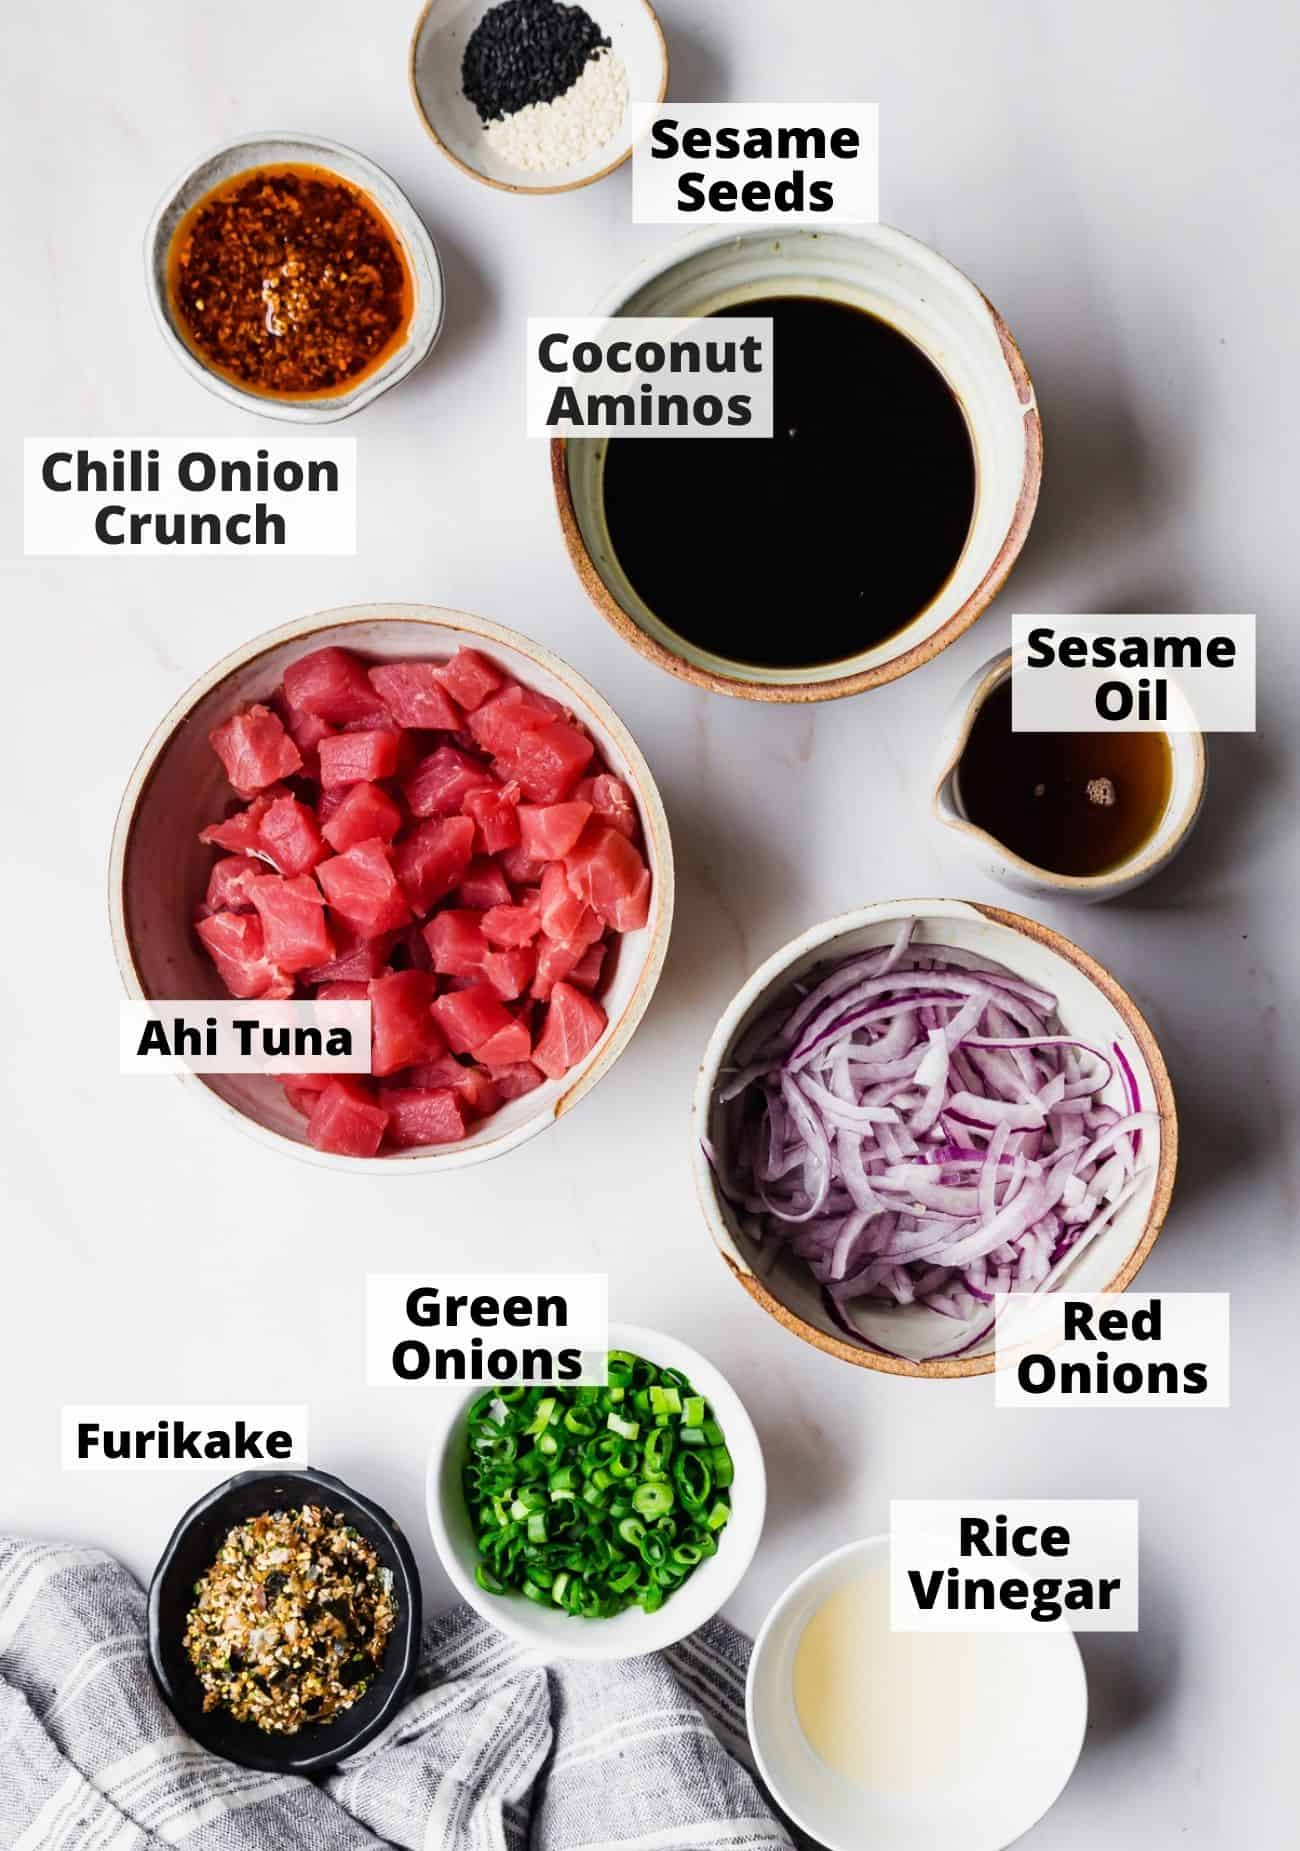 ingredients prepped and laid out for poke bowls: Sesame Seeds, Coconut Aminos, Chili Onion Crunch, Ahi Tuna, Sesame Oil, Green Onions, Red Onions, Rice Vinegar, Furikake